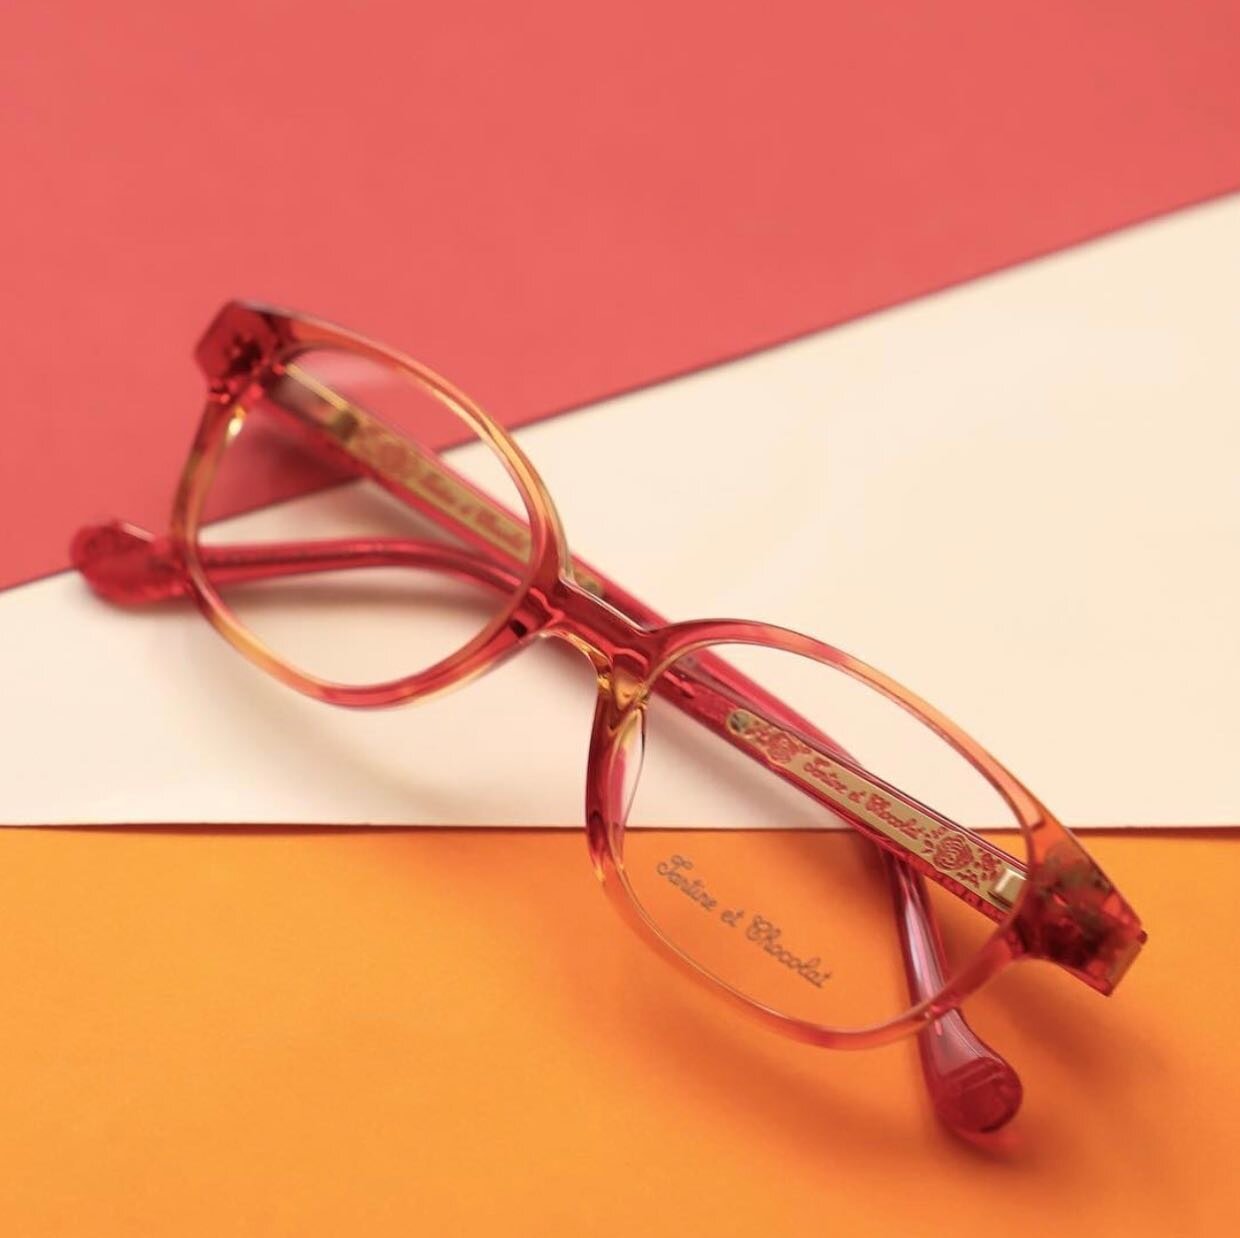 With the warmer weather finally coming back, it&rsquo;s time to bring out our fav routine summer styles... and what better place to start than with these Tartine Et Chocolat frames 🤓 
-
Tartine et Chocolate is known for providing Australia&rsquo;s m